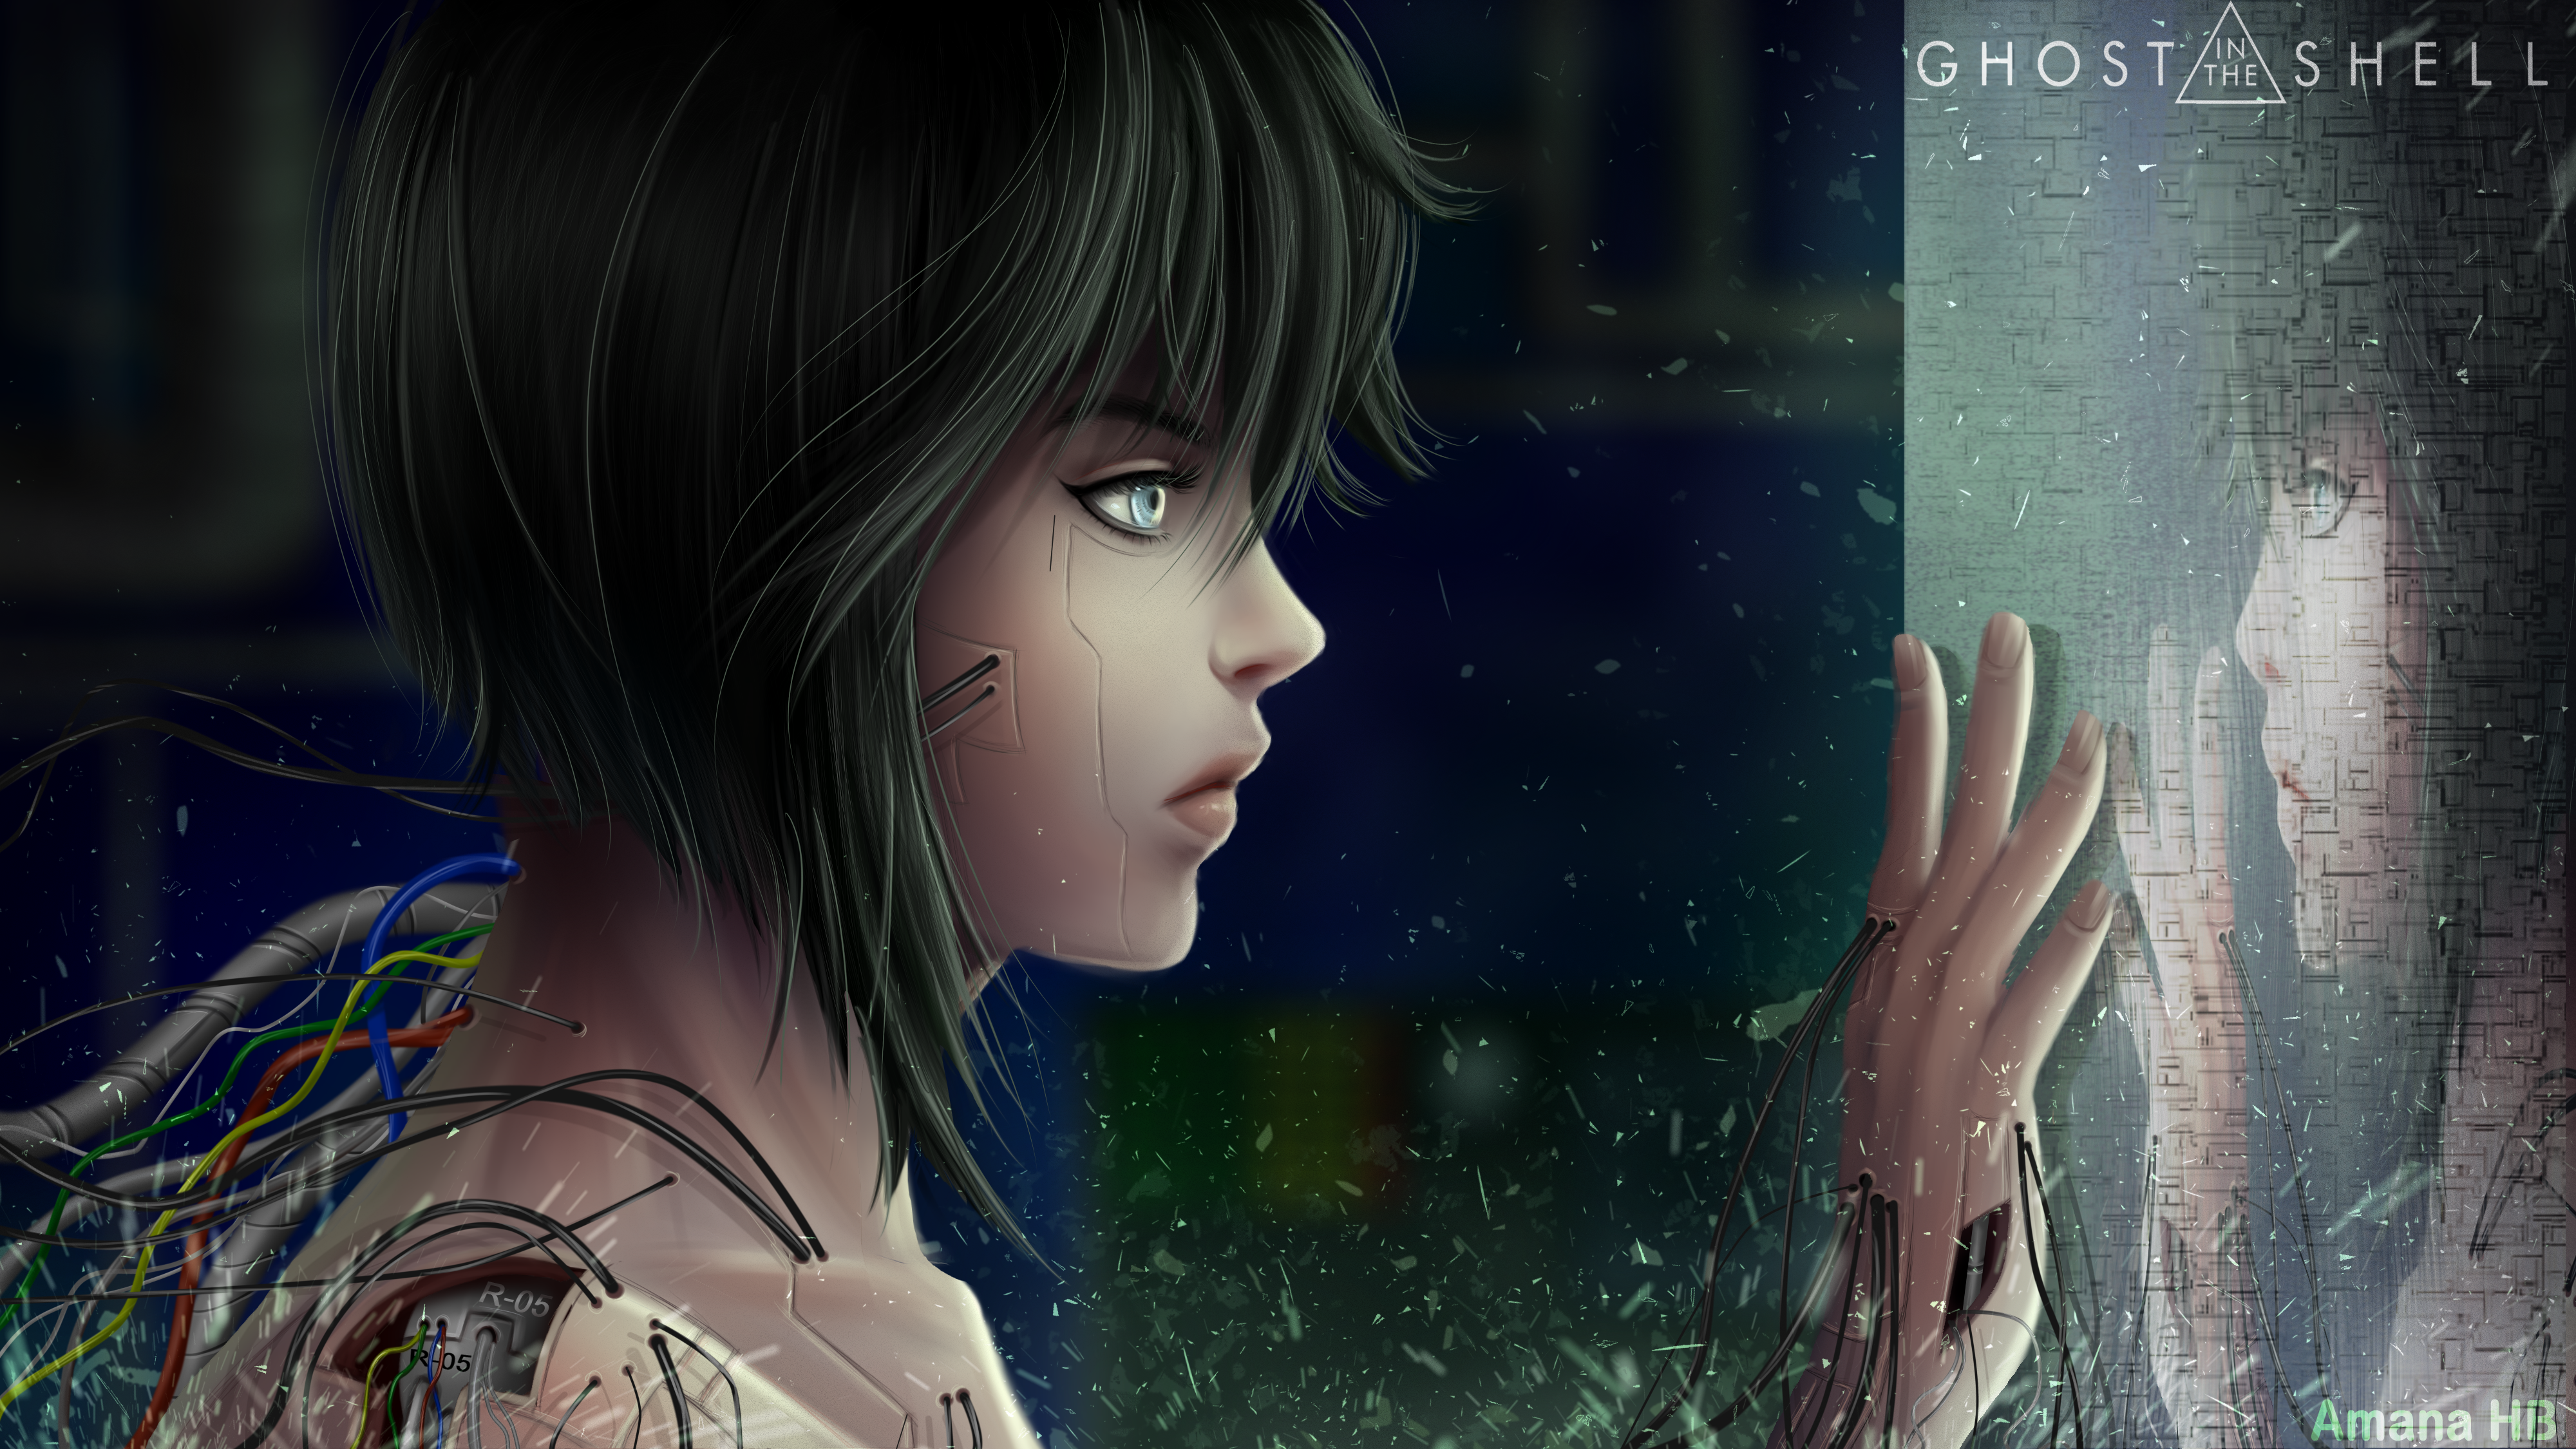 Ghost in The Shell Digital Fanart by Amana_HB